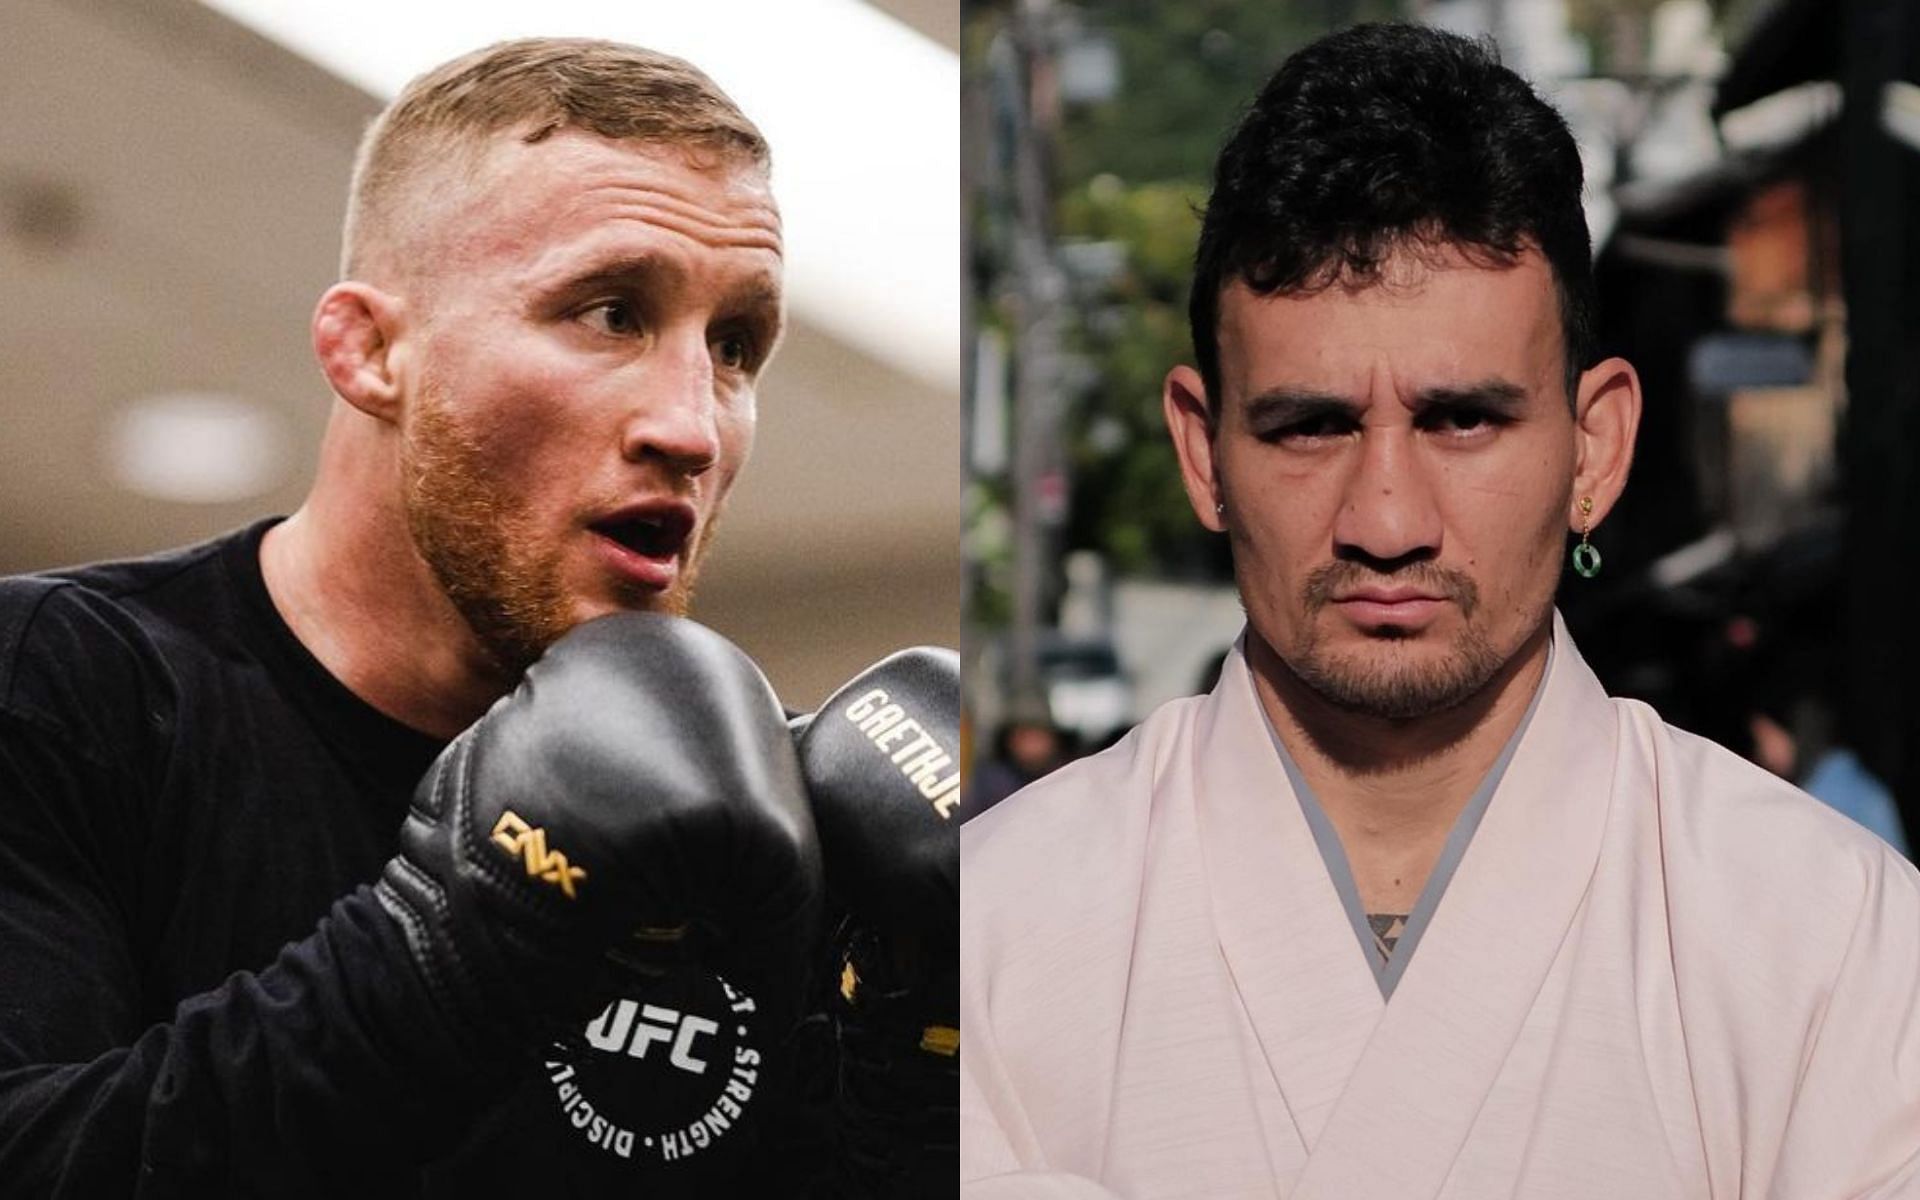 Justin Gaethje (left) versus Max Holloway (right) is one of the most eagerly-awaited MMA fights of 2024 [Images courtesy: @justin_gaethje and @blessedmma on Instagram]